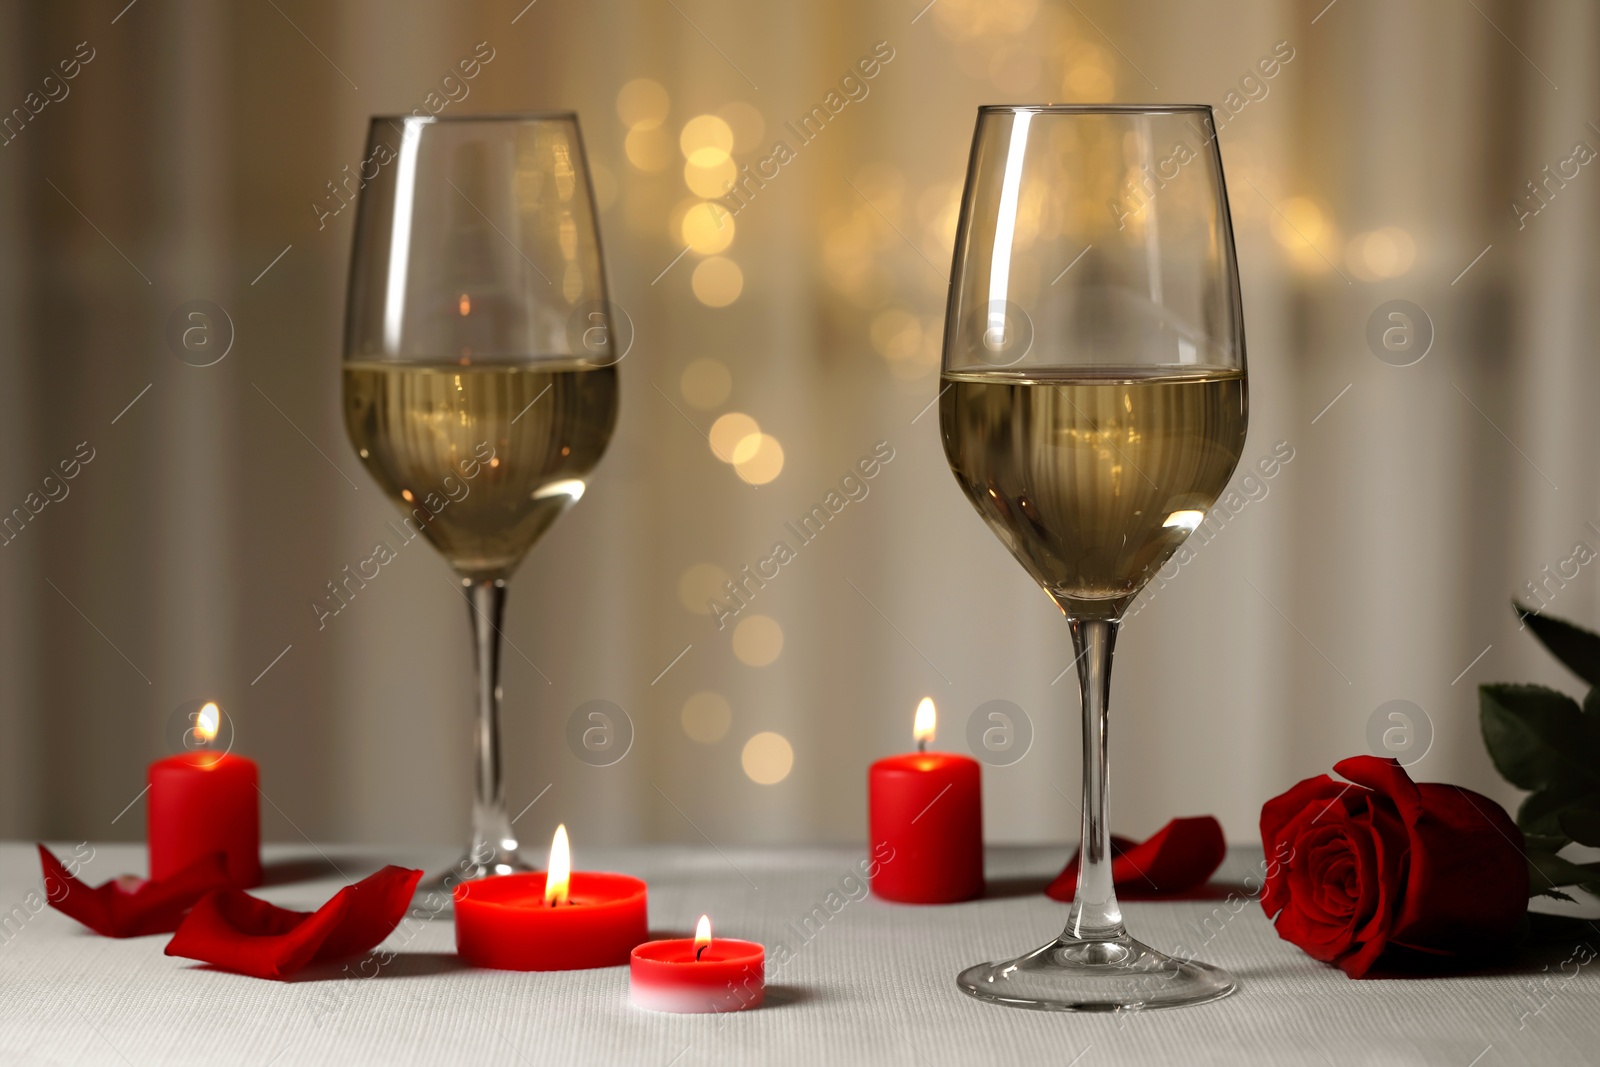 Photo of Glasses of white wine, rose flower and burning candles on grey table against blurred lights. Romantic atmosphere